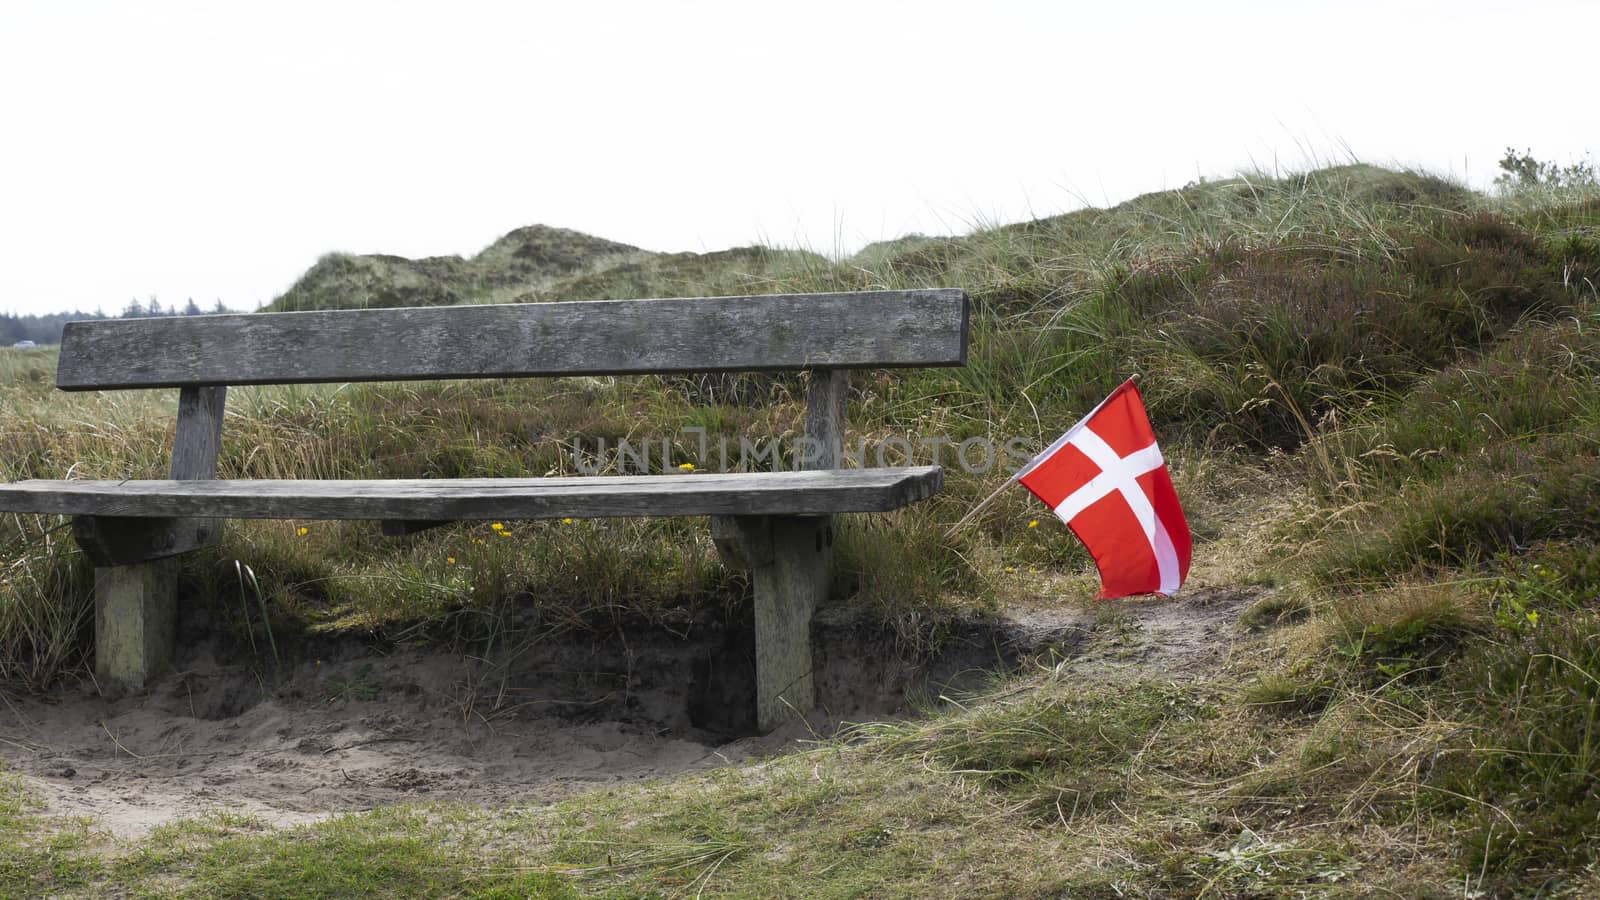 A bench to rest in the national park in Denmark